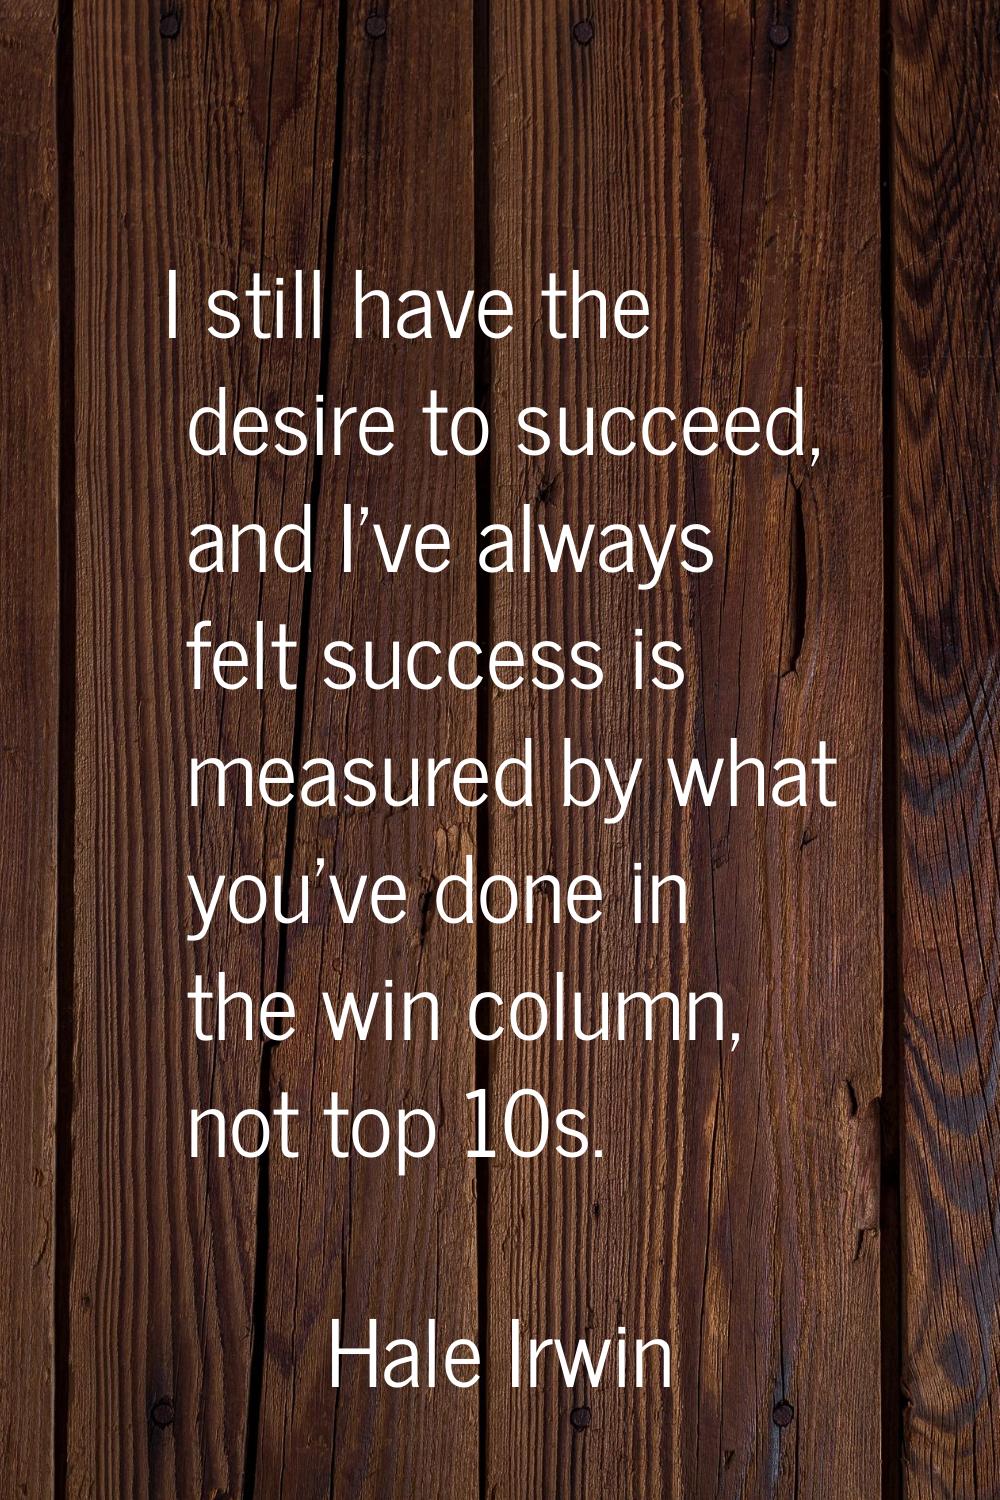 I still have the desire to succeed, and I've always felt success is measured by what you've done in